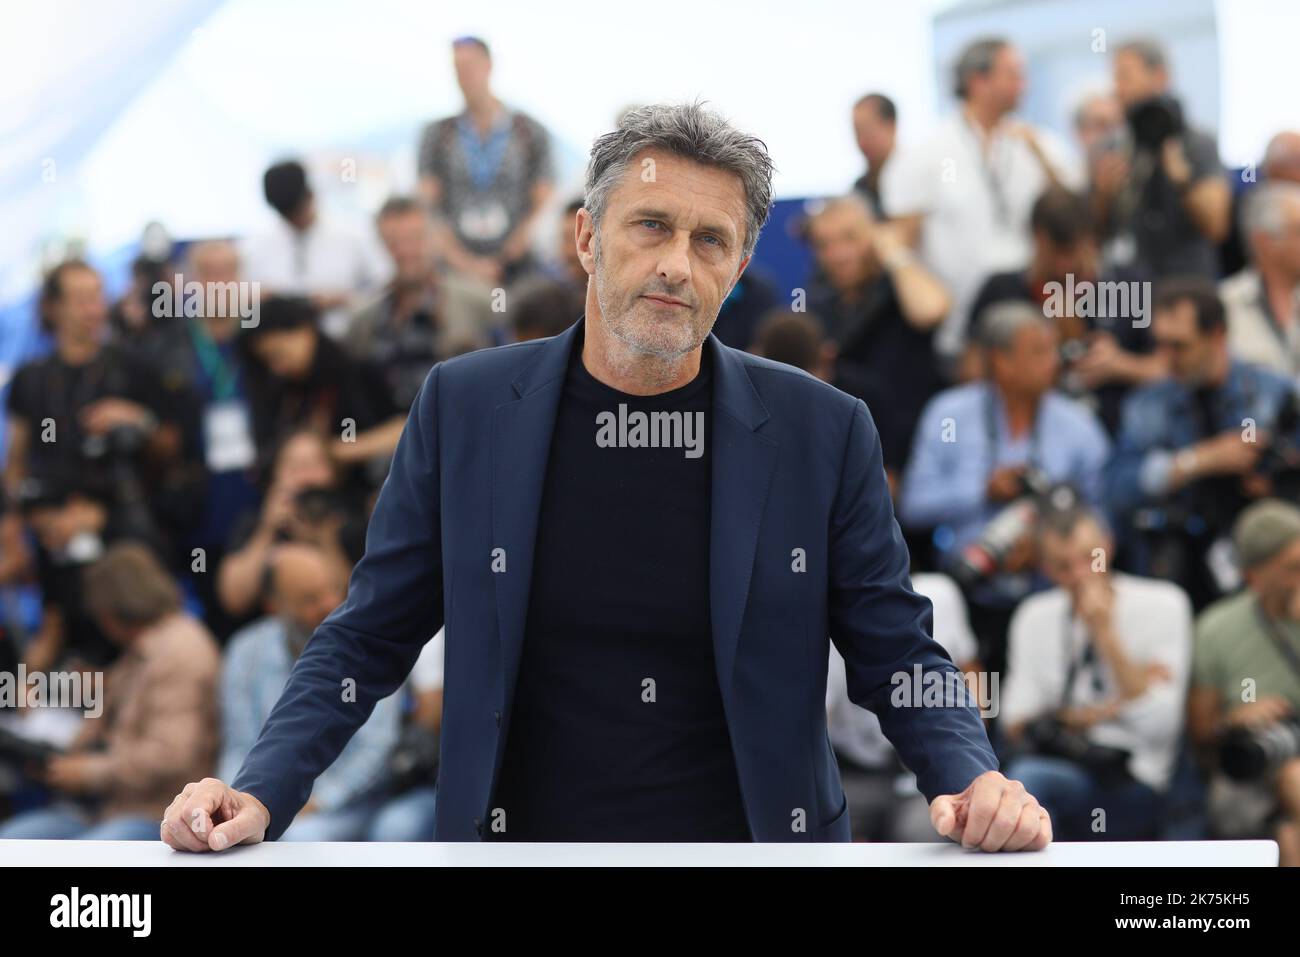 Polish director Pawel Pawlikowski waves on May 11, 2018 during a photocall for the film 'Cold War (Zimna Wojna)' at the 71st edition of the Cannes Film Festival in Cannes, southern France. Stock Photo